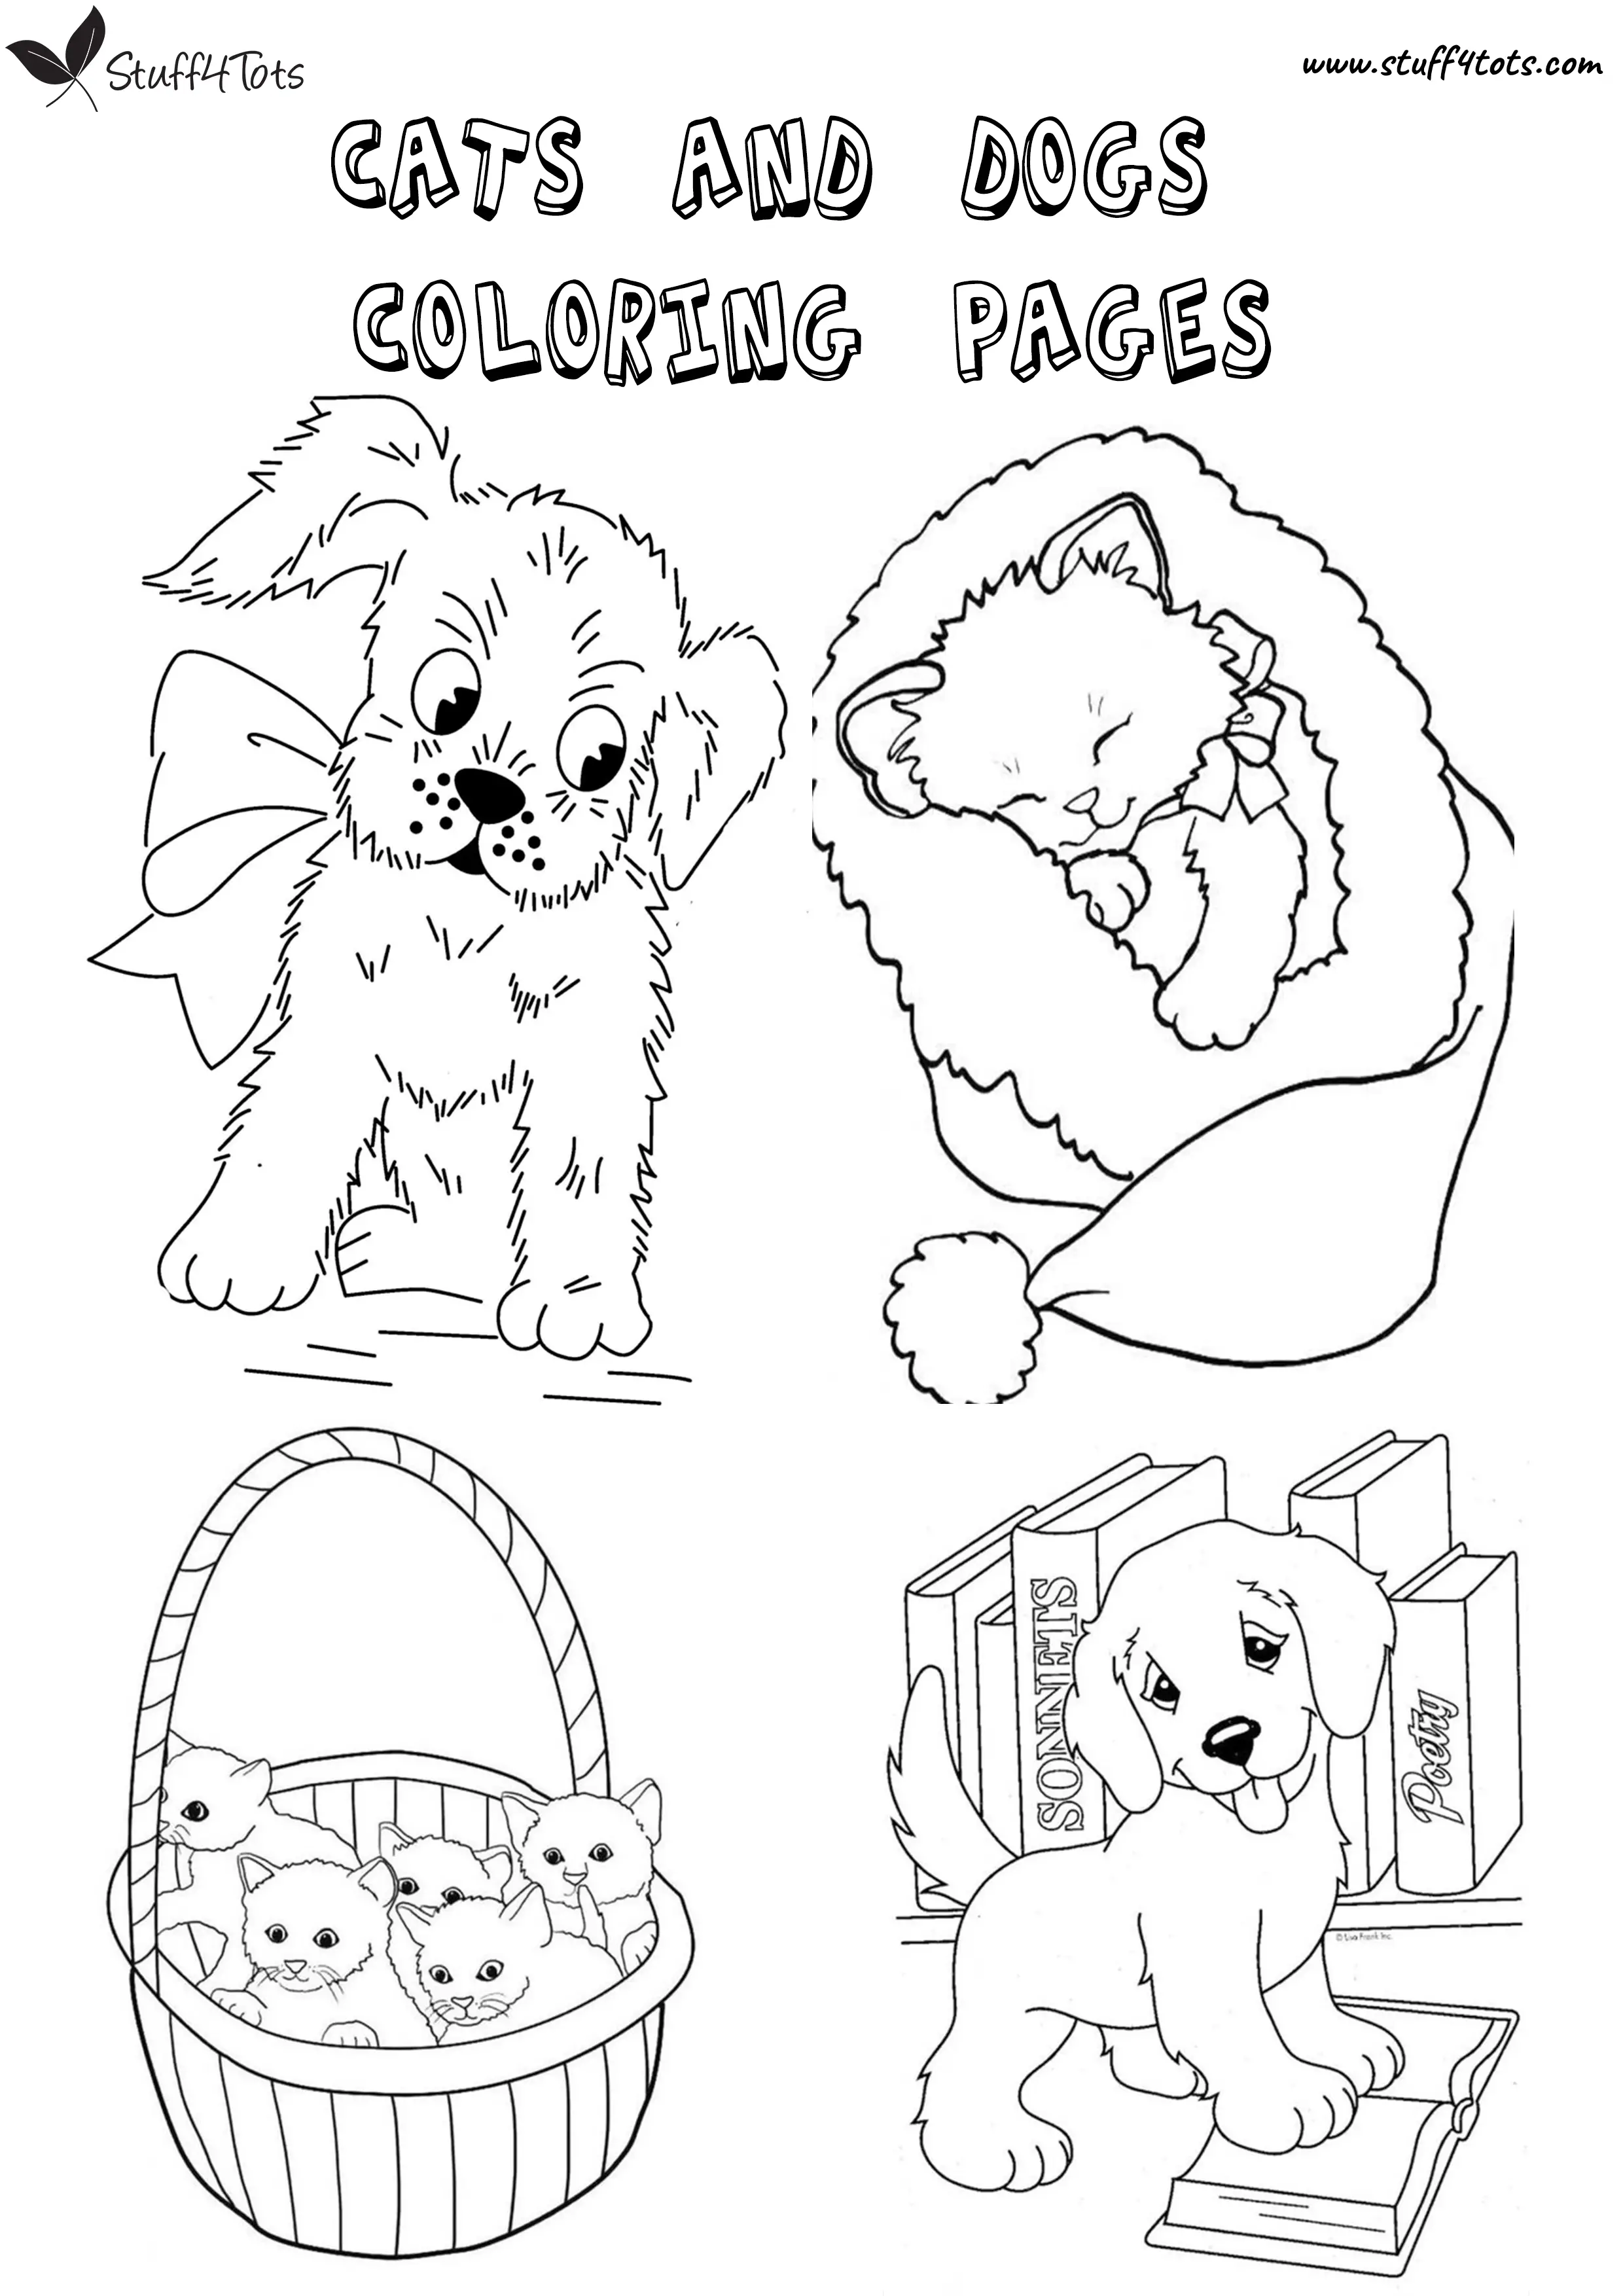 Cats and Dogs coloring page